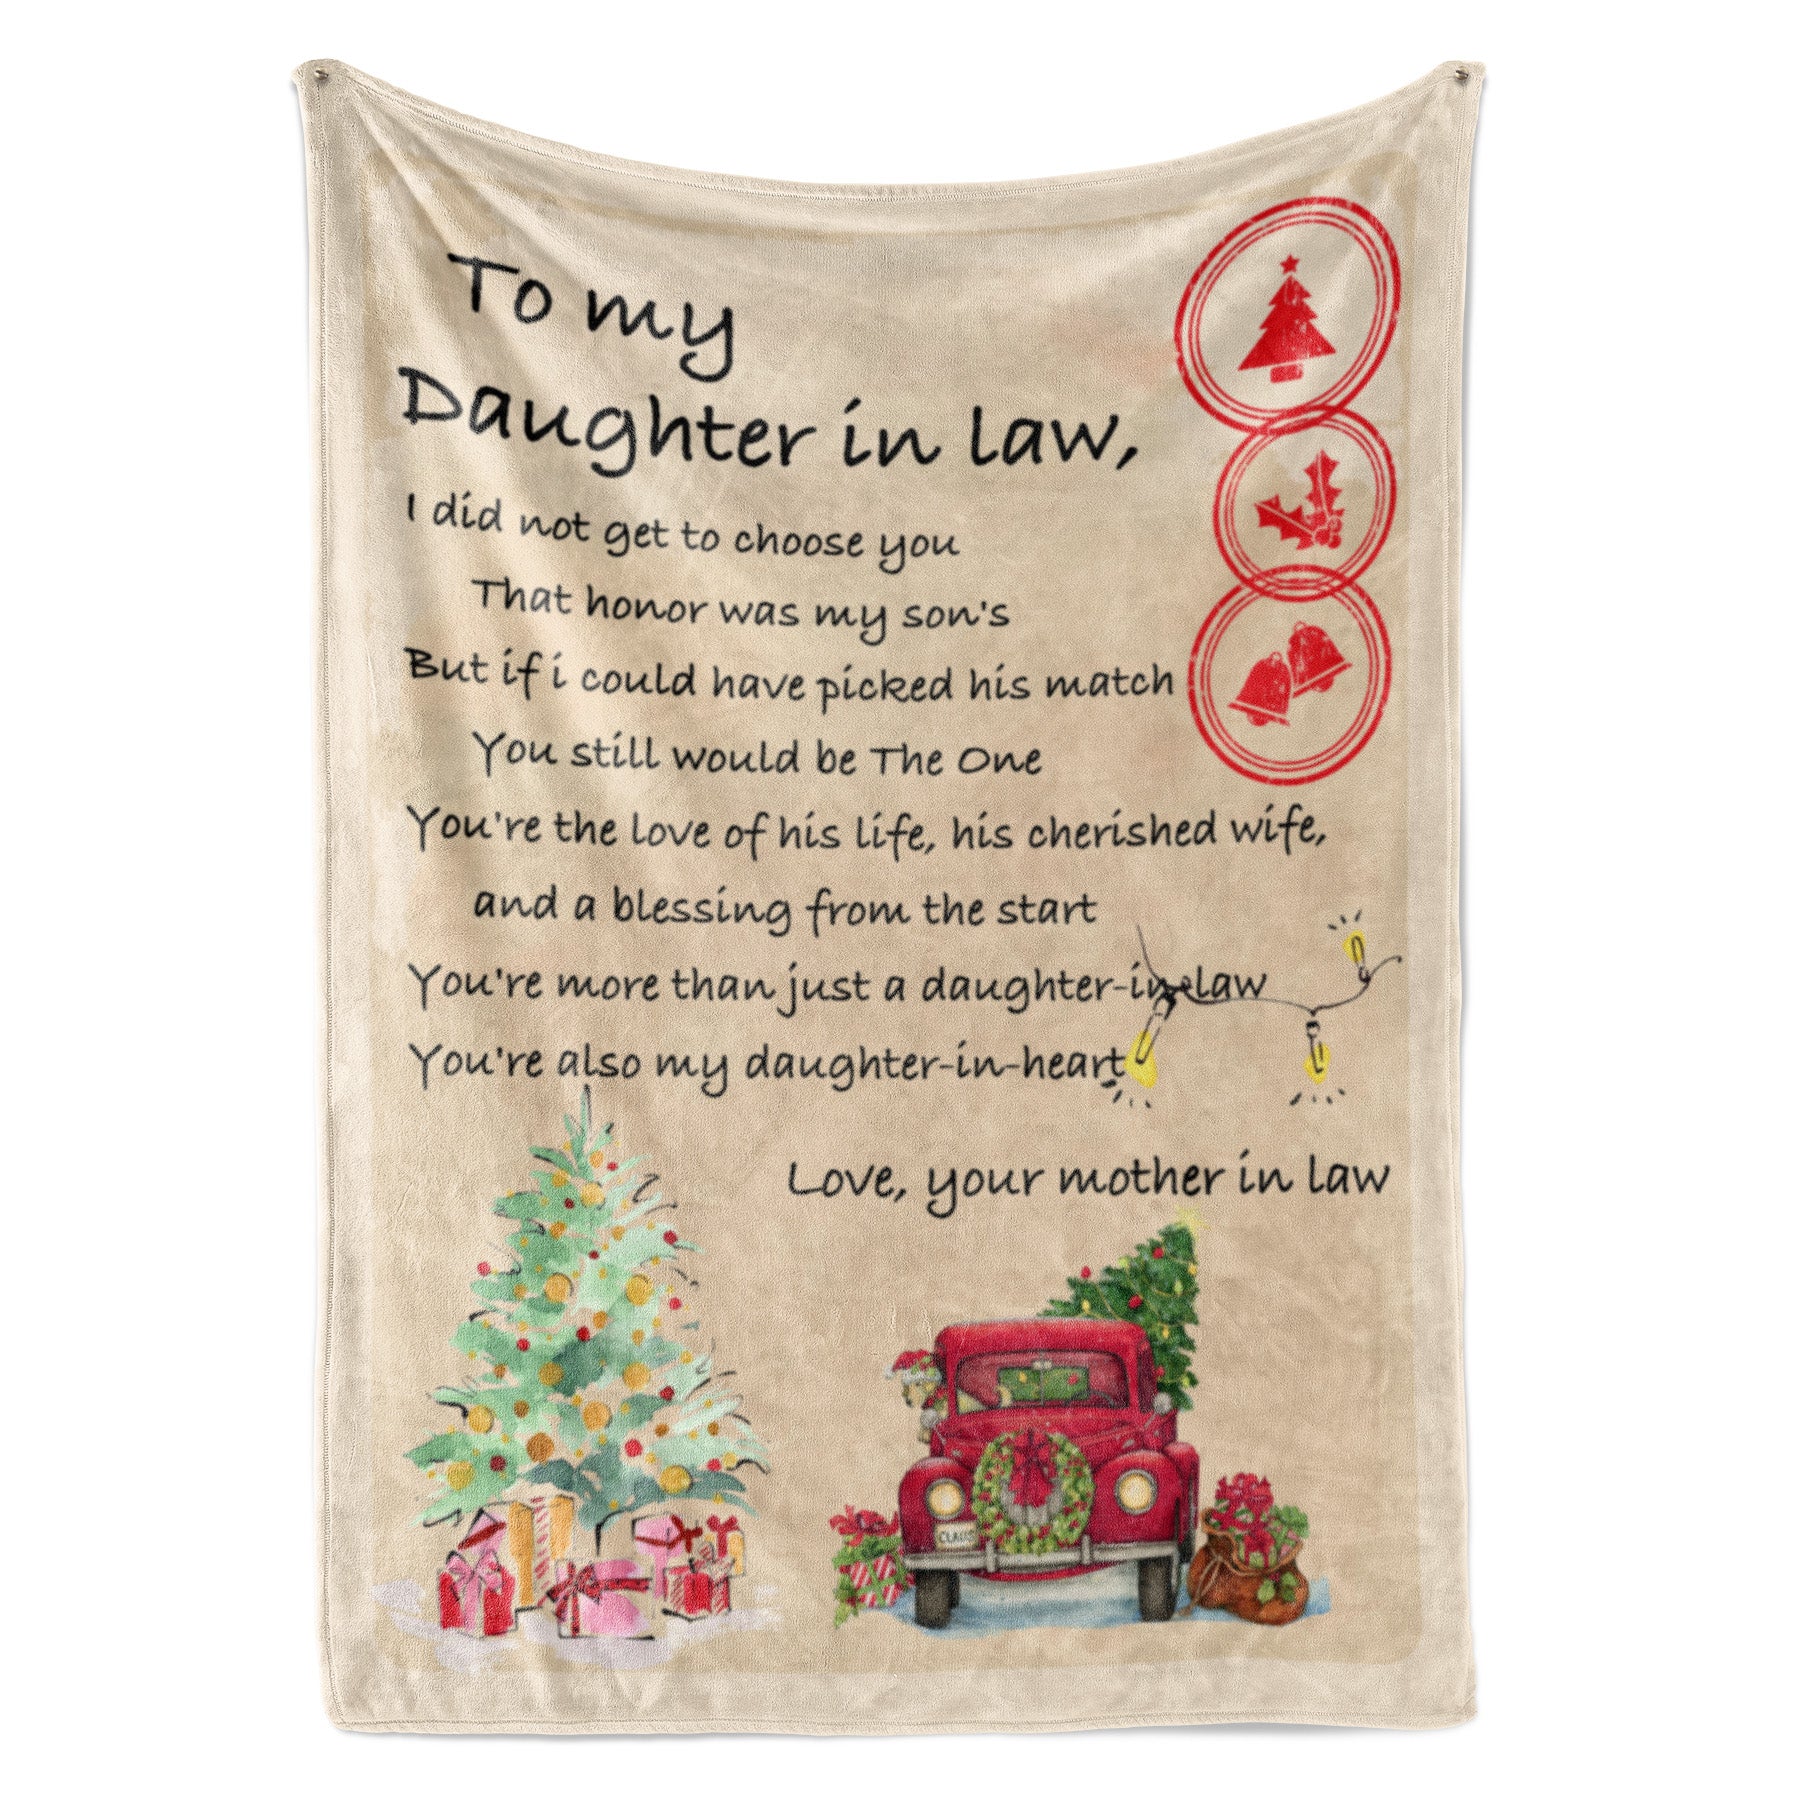 Christmas Blanket For Daughter In Law, Gift Ideas For Daughter In Law, Honor Was My Son